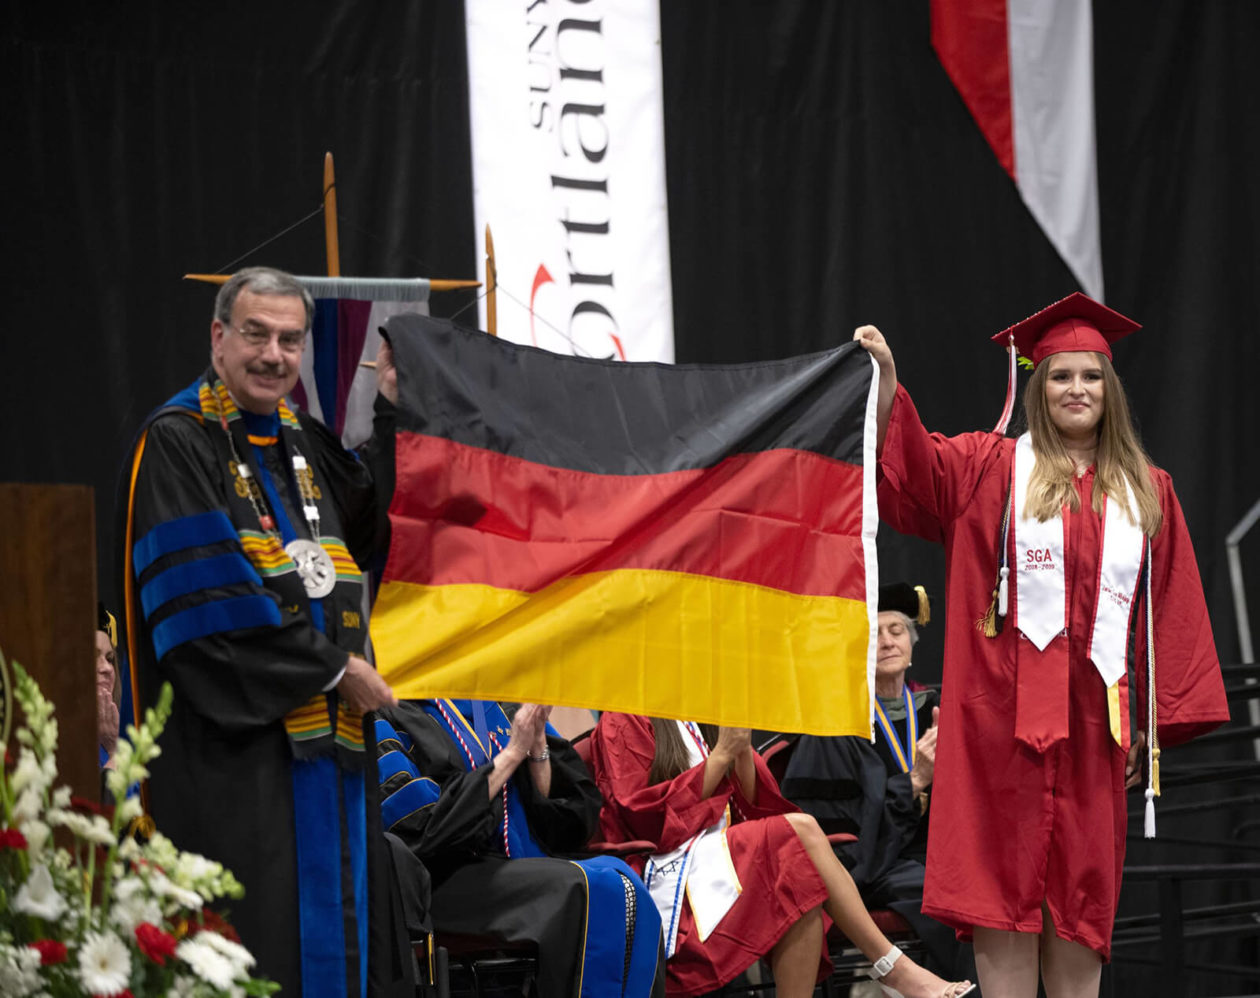 Student in a red graduation cap and gown holding a flag.